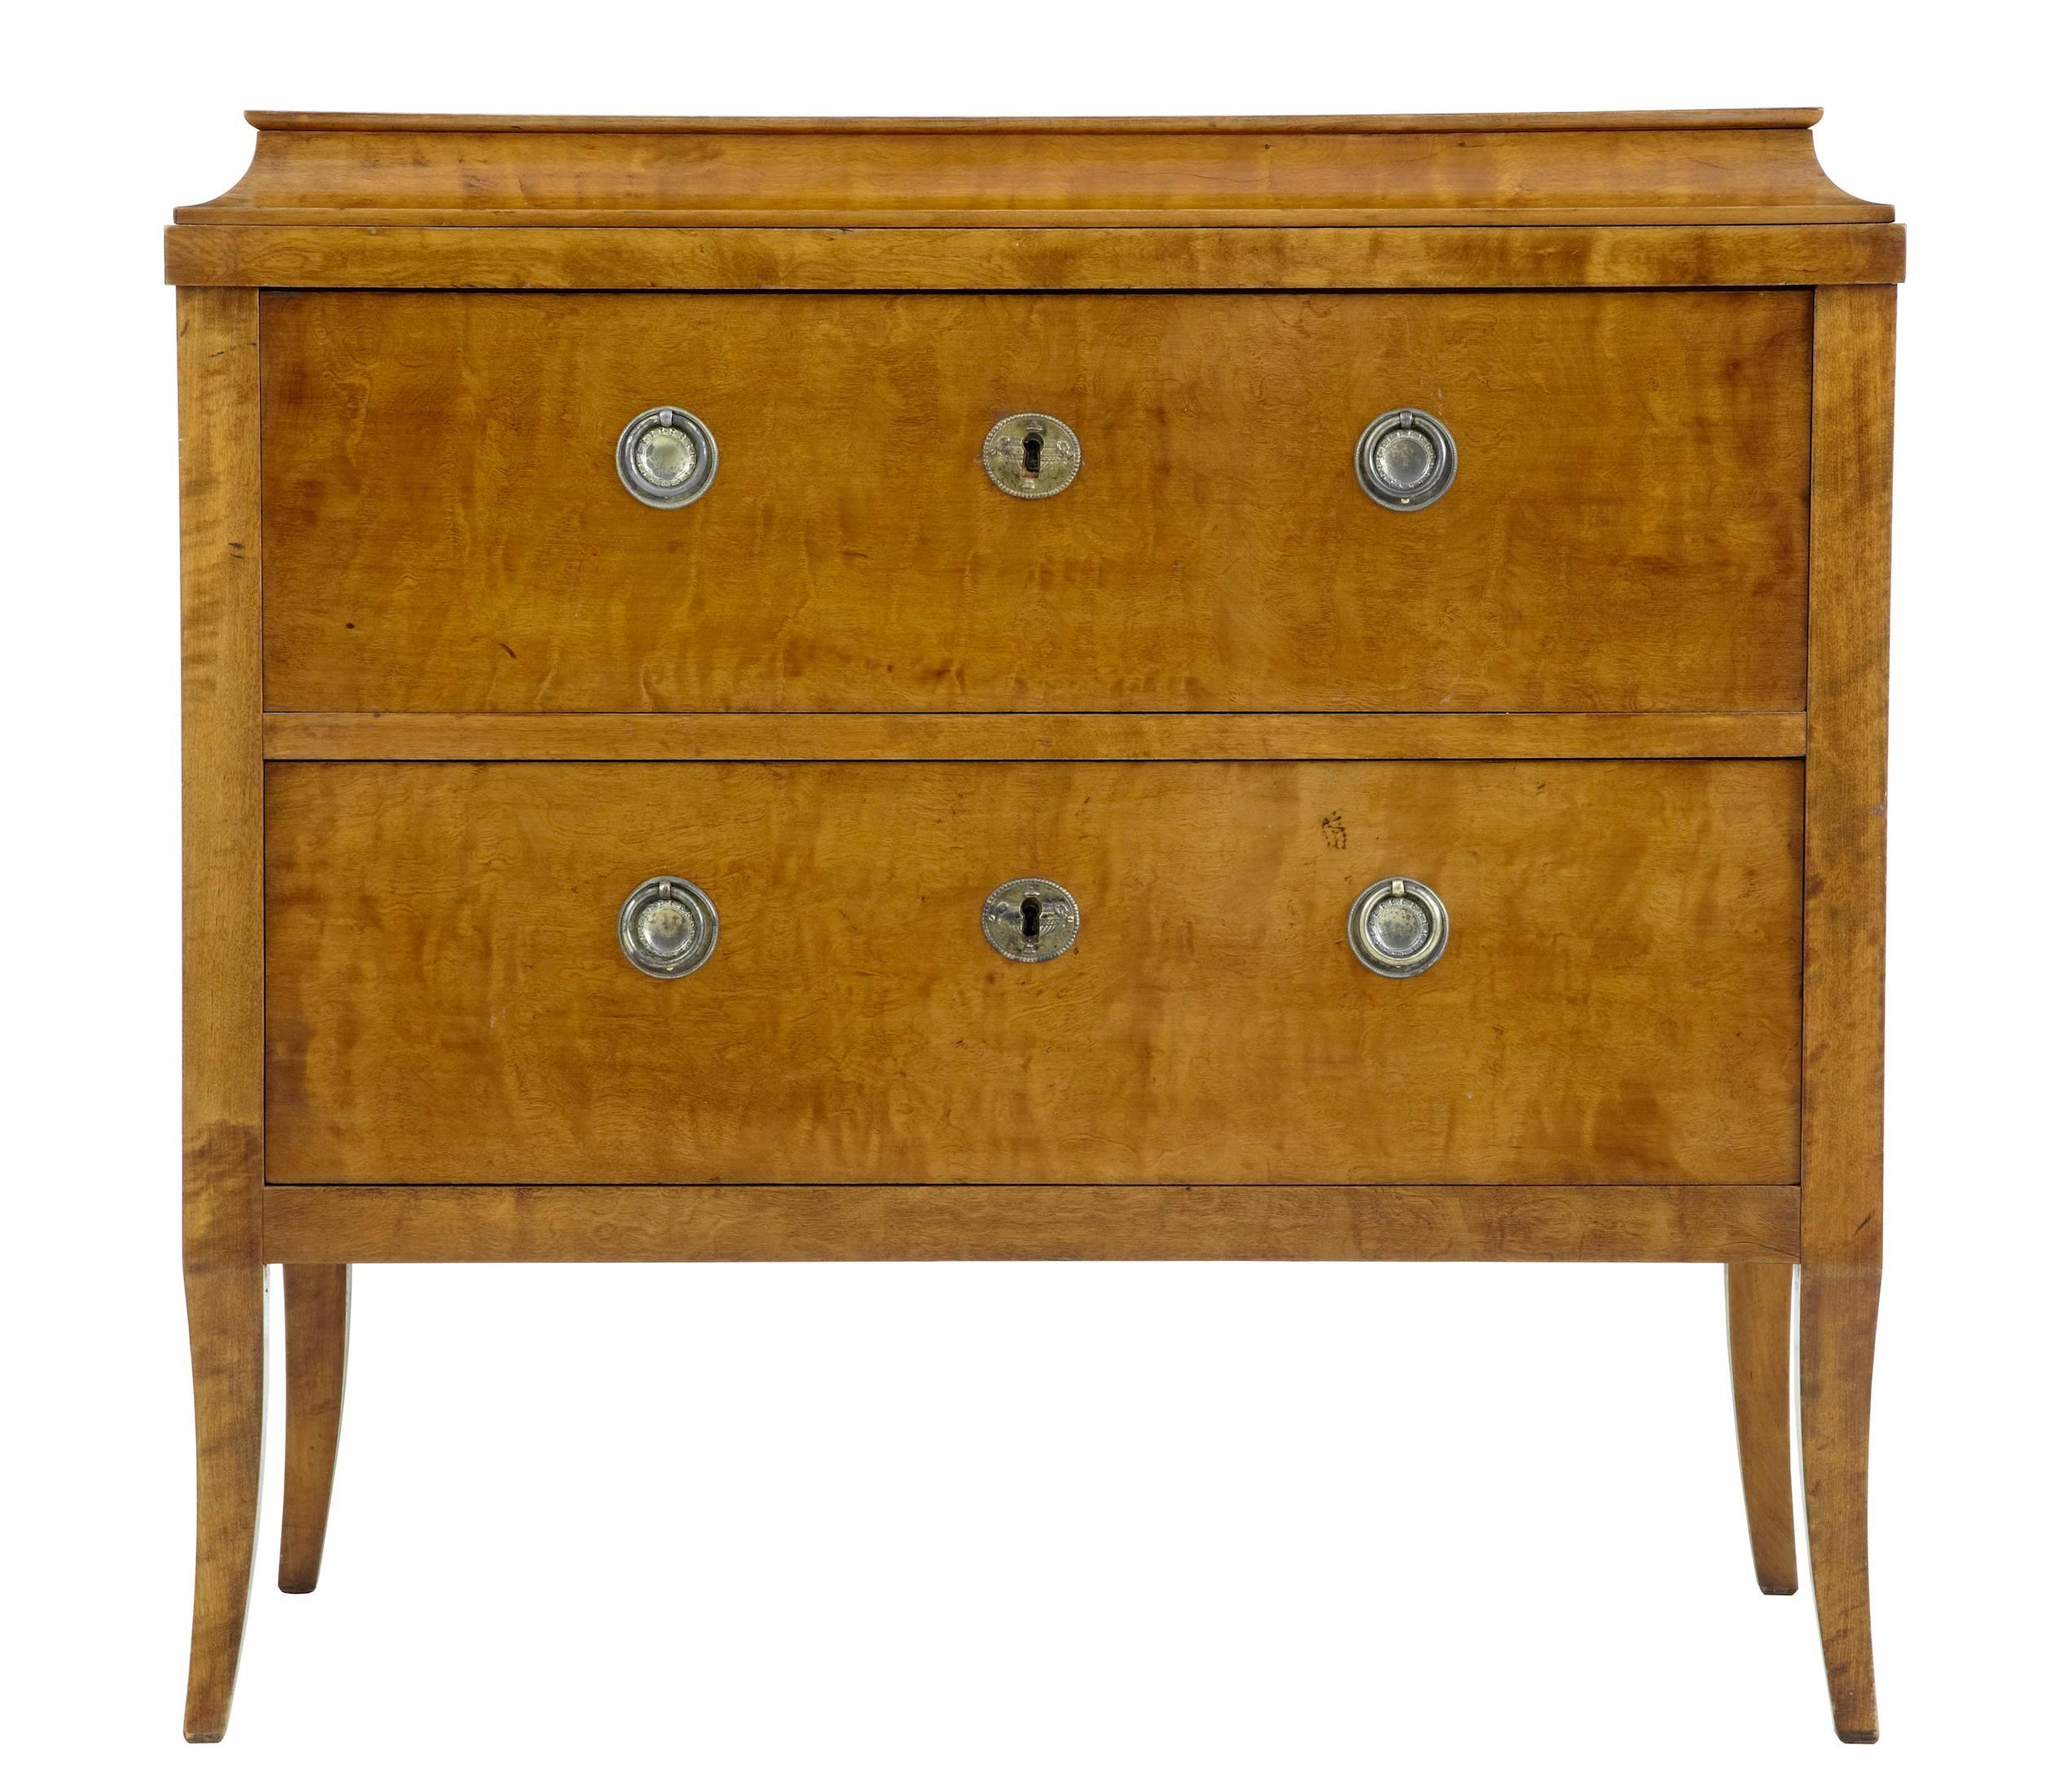 Stunning small birch commode, circa 1900.
Good color and patina on this chest which is very much in the Empire style.
Replaced handles, which are older than the chest but in keeping with the style.
Two drawers with one key.
Standing on tapering